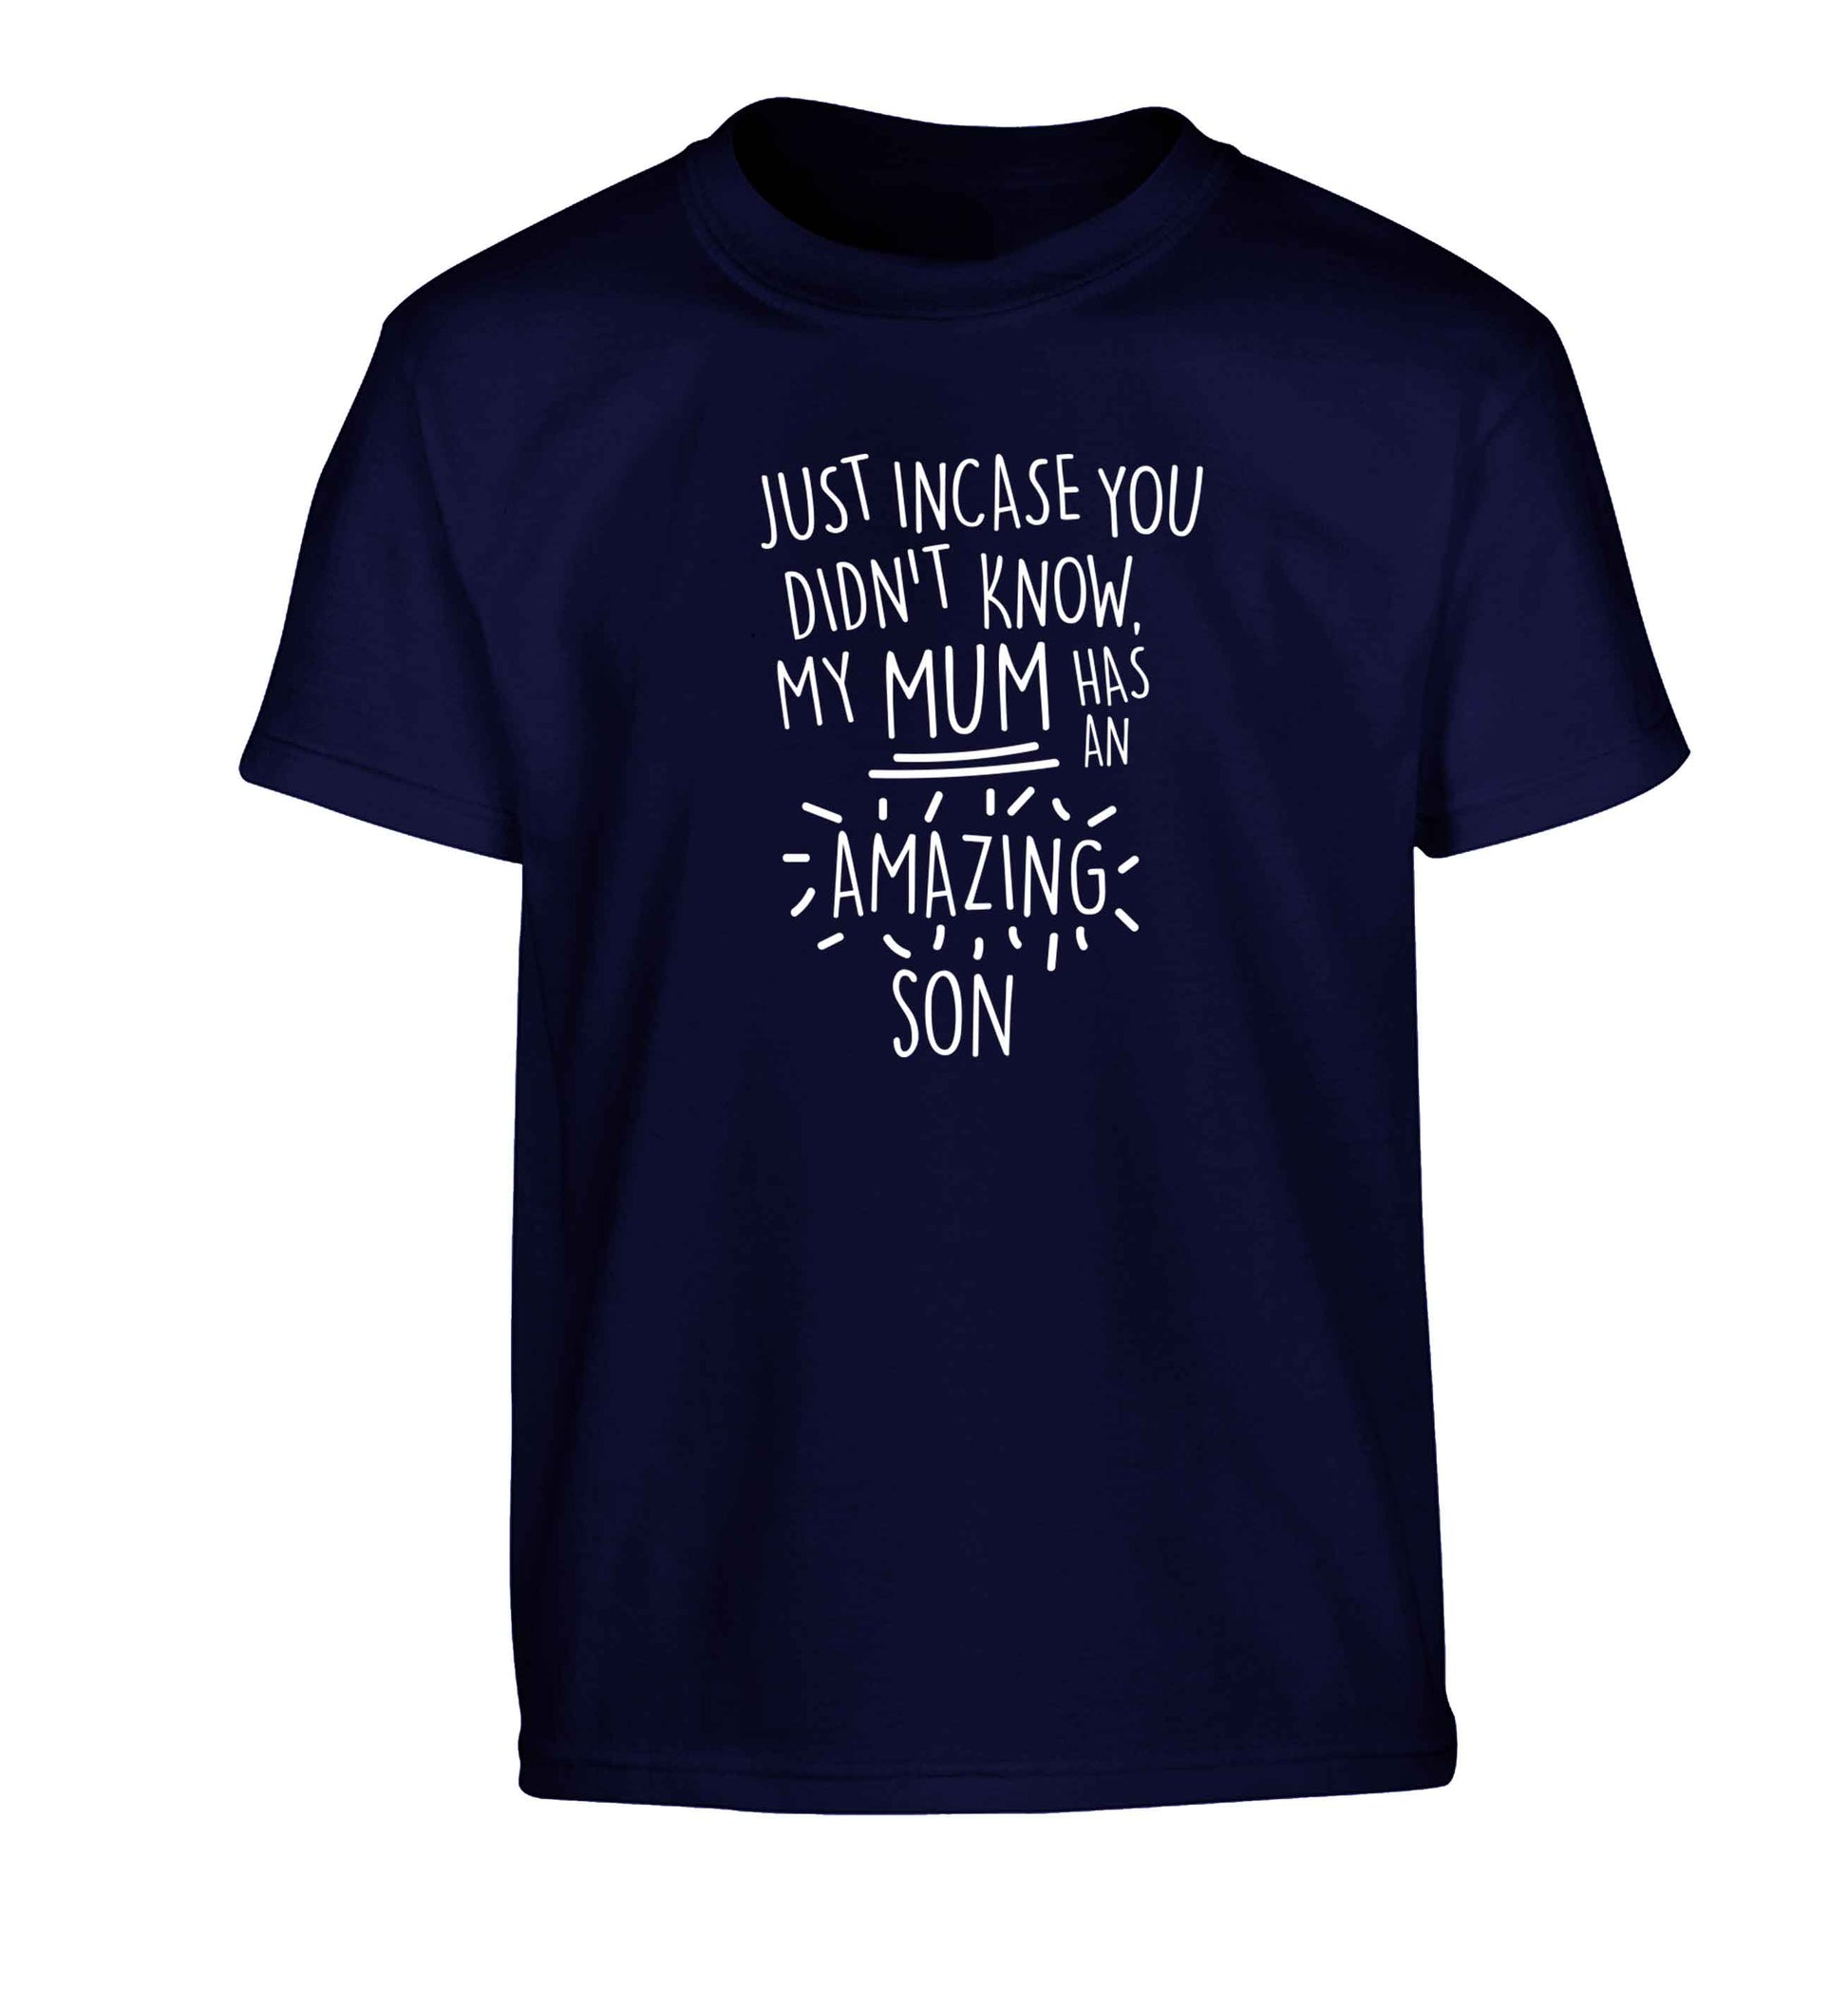 Just incase you didn't know my mum has an amazing son Children's navy Tshirt 12-13 Years